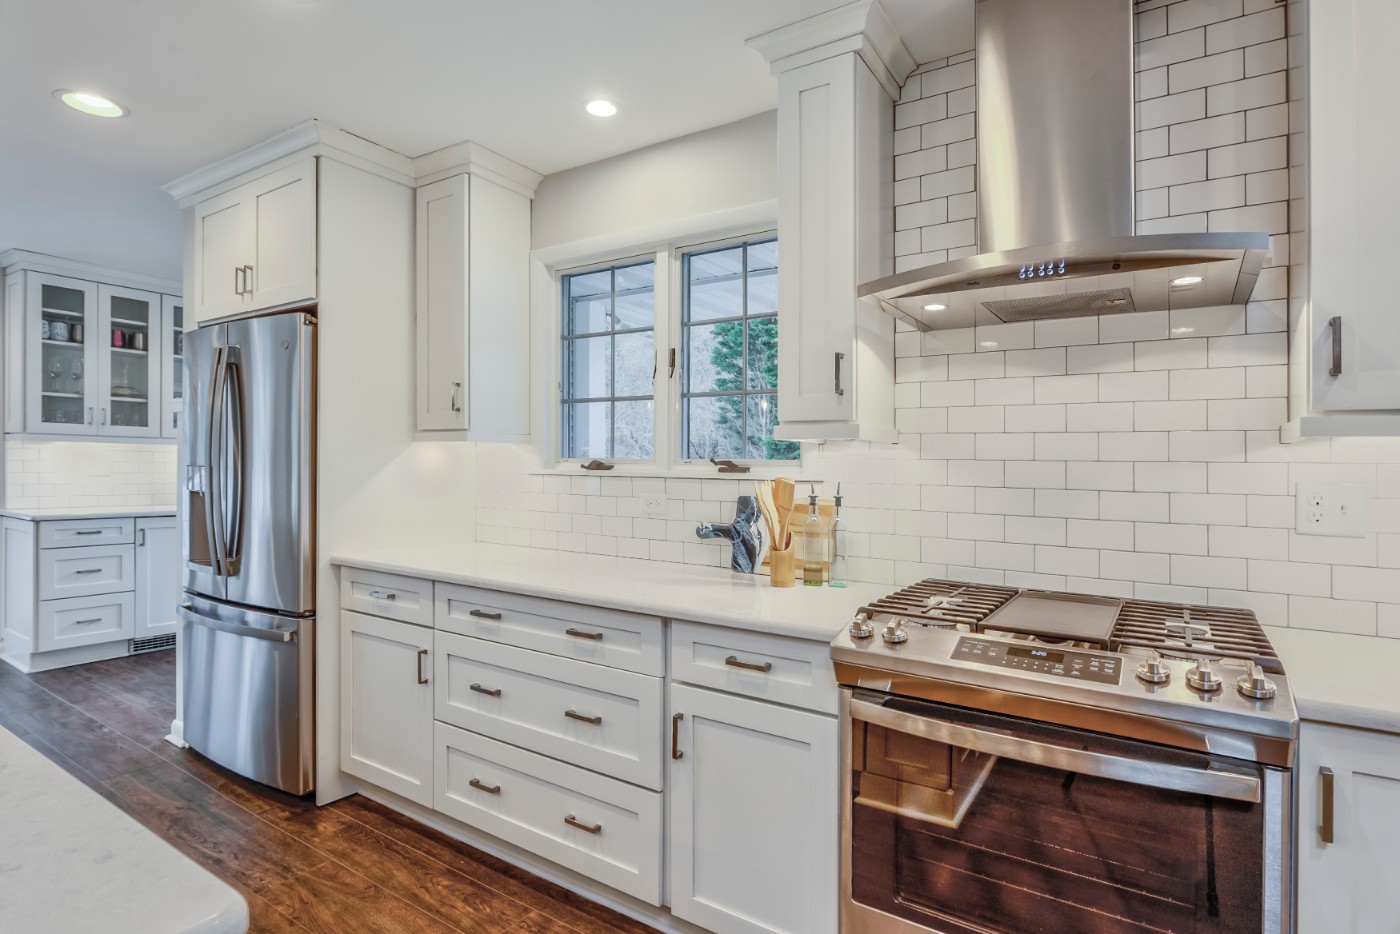 Canal Way Kitchen Remodel in Bethany Beach DE with White Shaker Cabinets and Stainless Steel Appliances